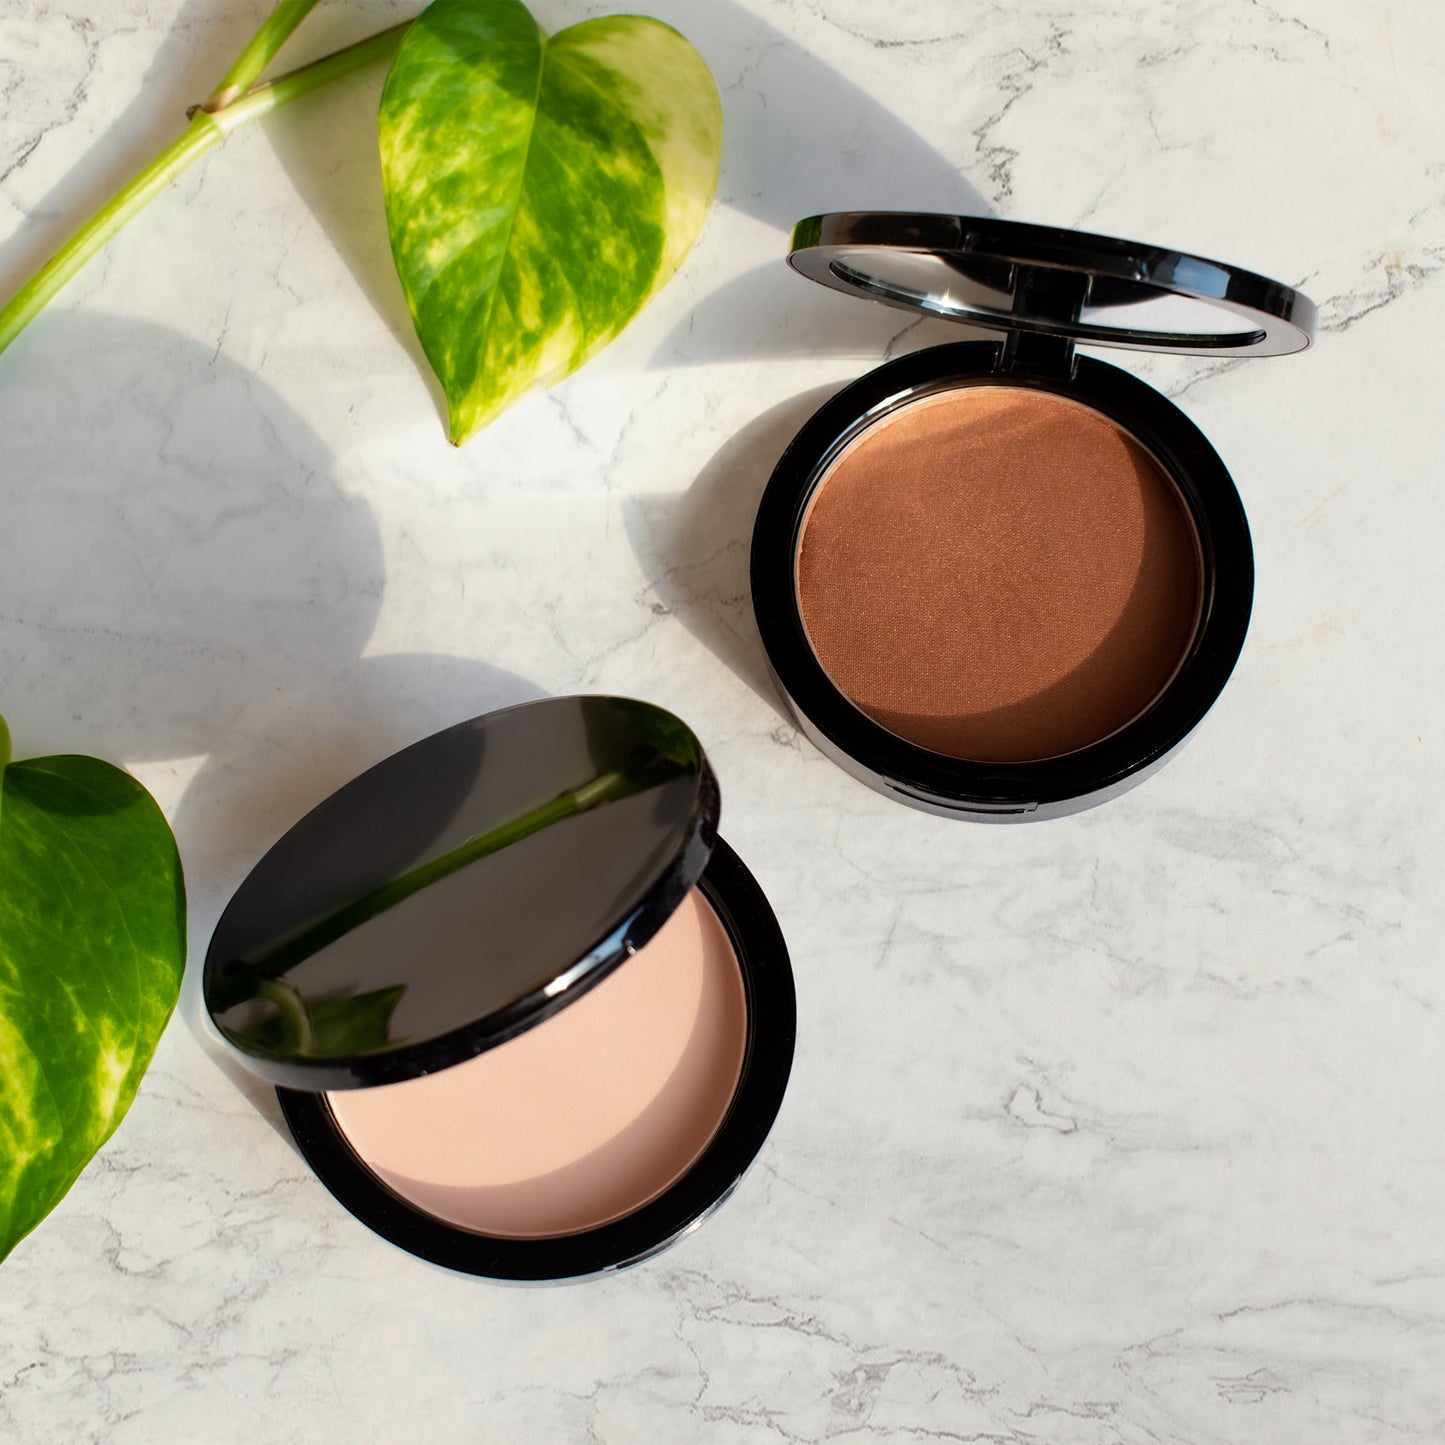 Discover the potential of Royal Dual Blend Powder Foundation by Cruisin Organics. Use it dry or wet for a versatile, weightless, and radiant finish. Available in a compact for touch ups on-the-go and suitable for all skin types.